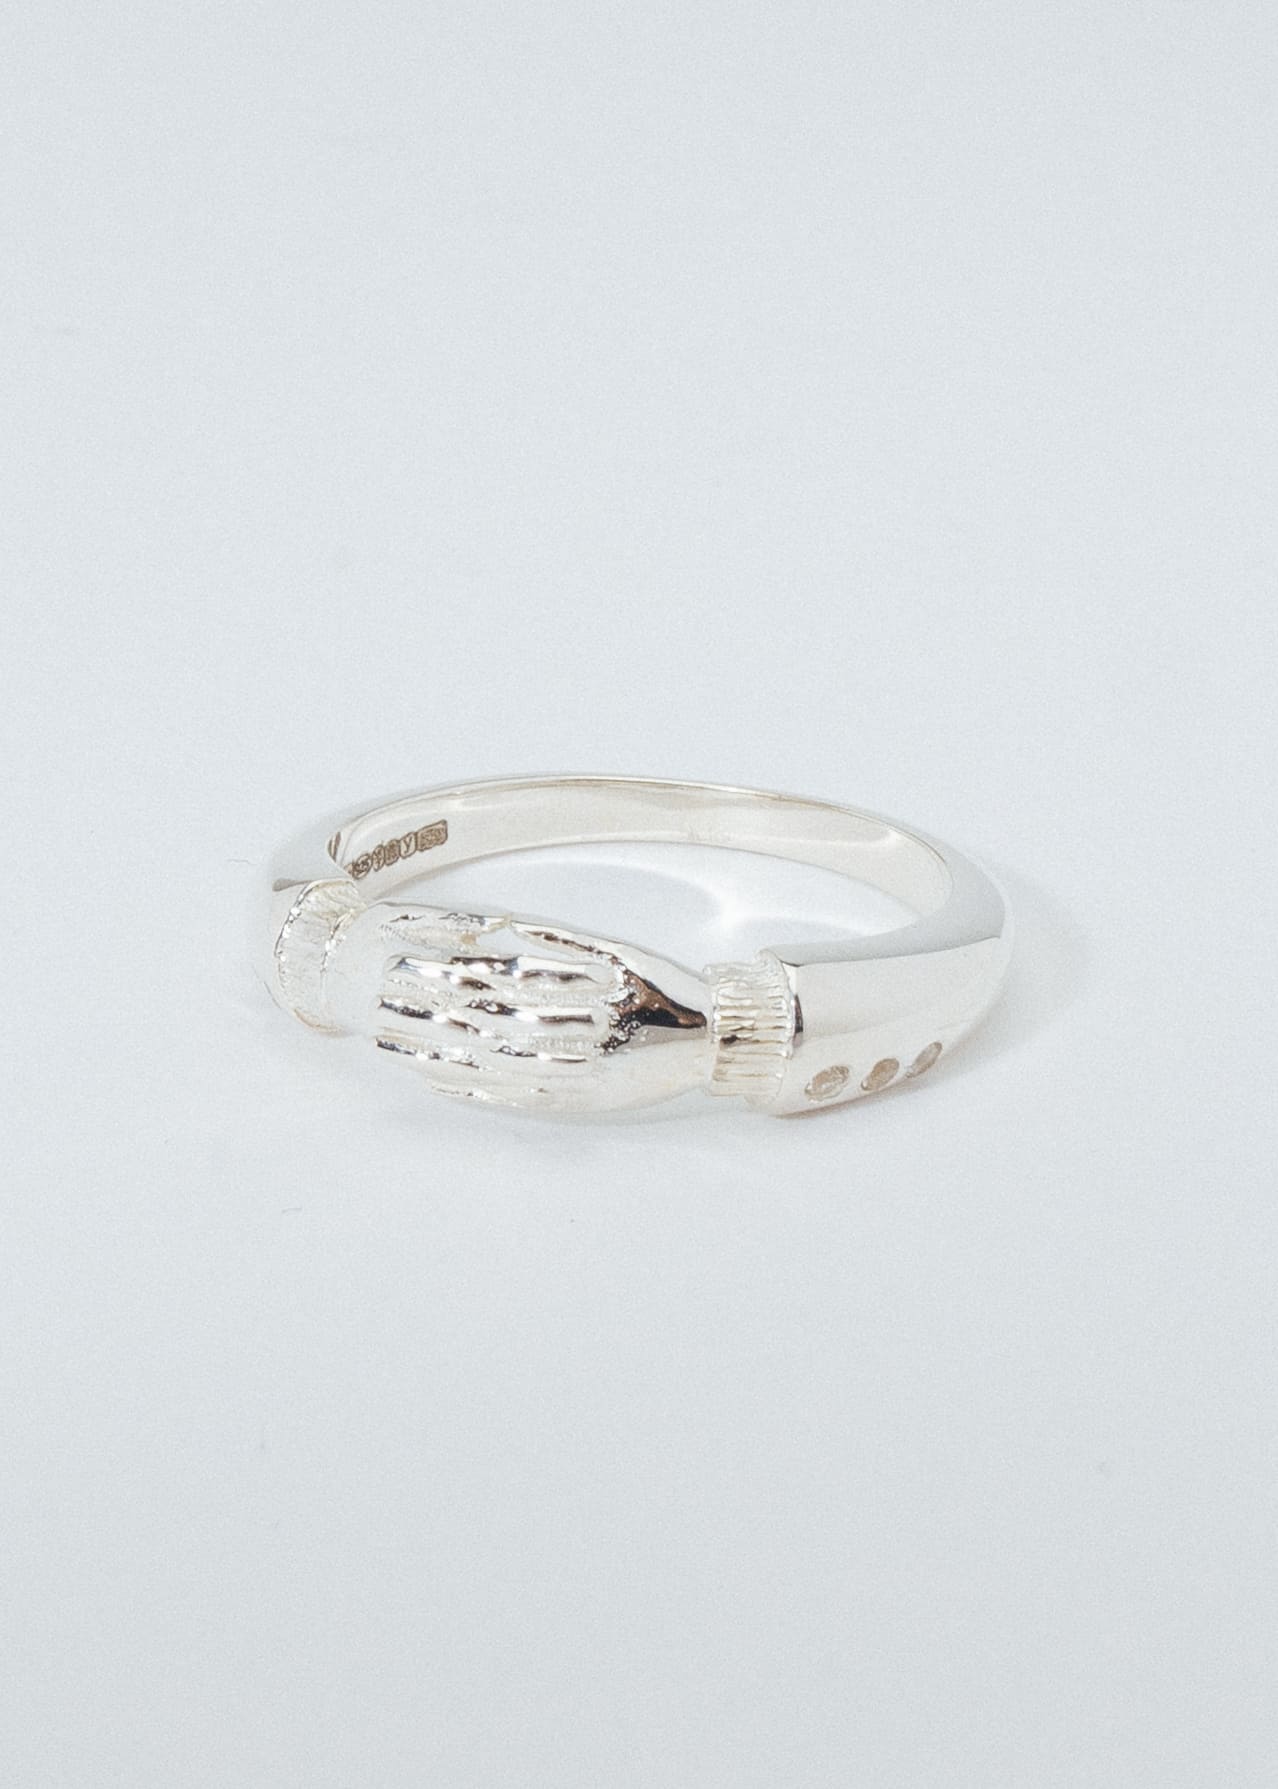 B213_Hands Of Thought Ring_L_02